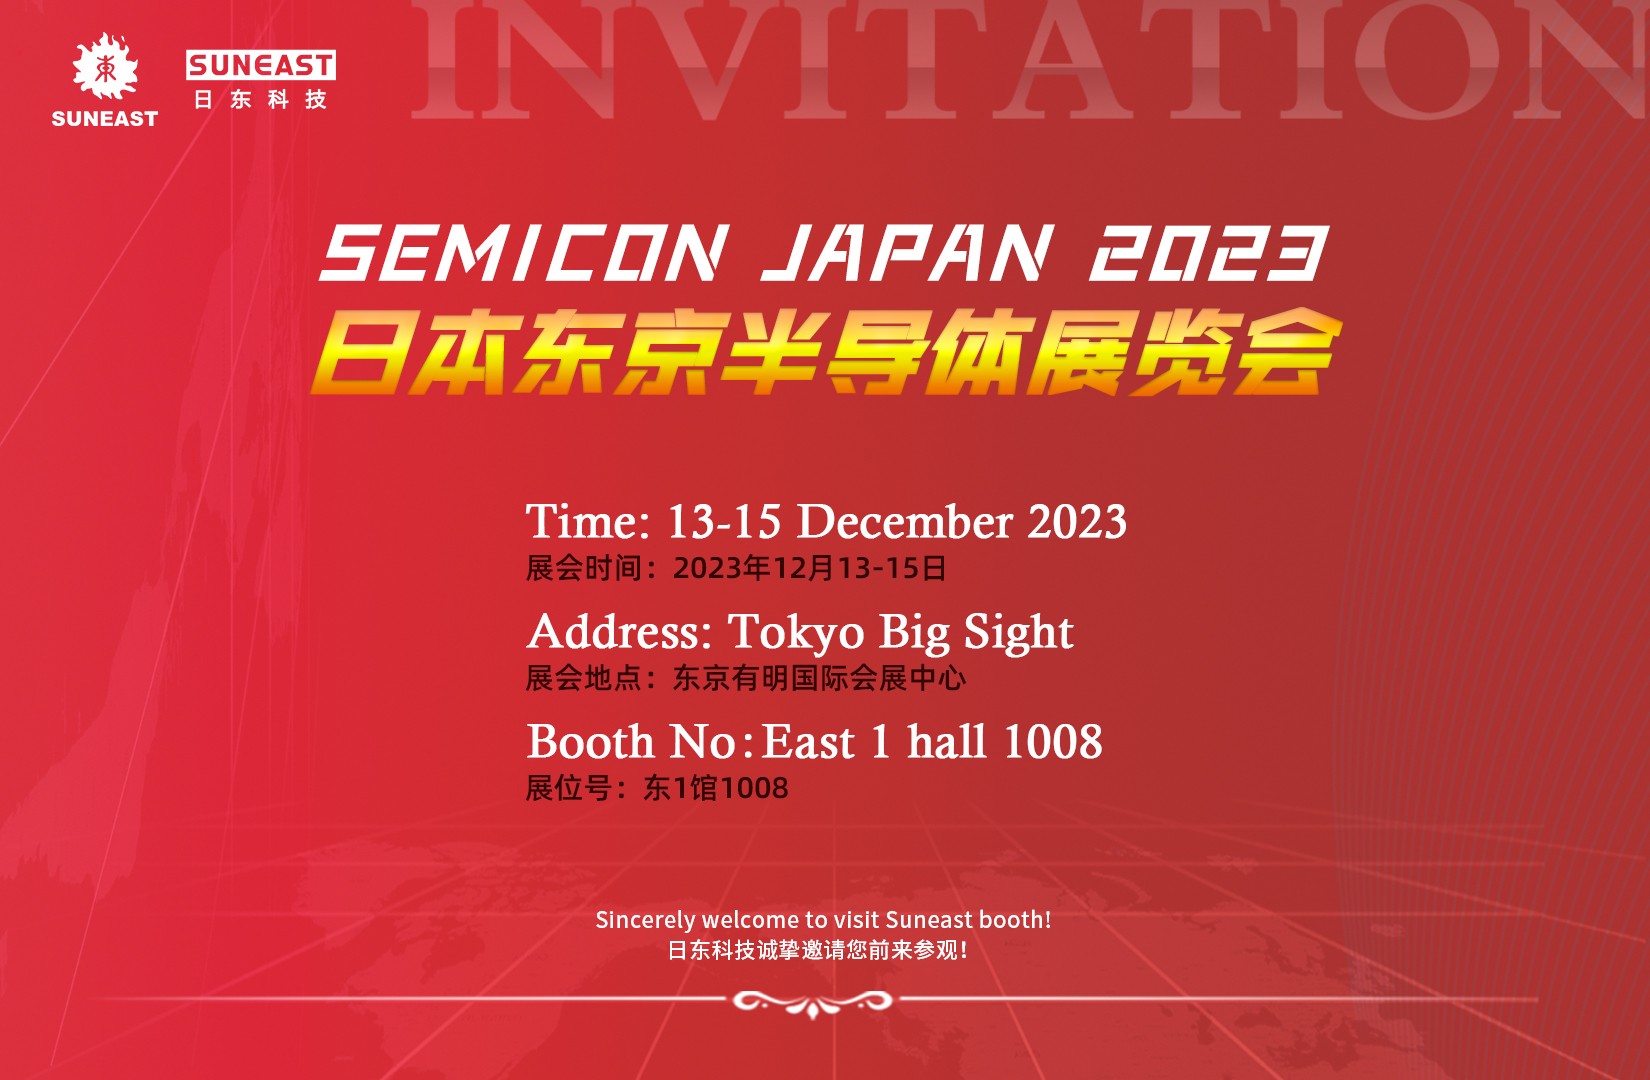 Sincerely welcome to visit Suneast booth in SEMICON Japan 2023!